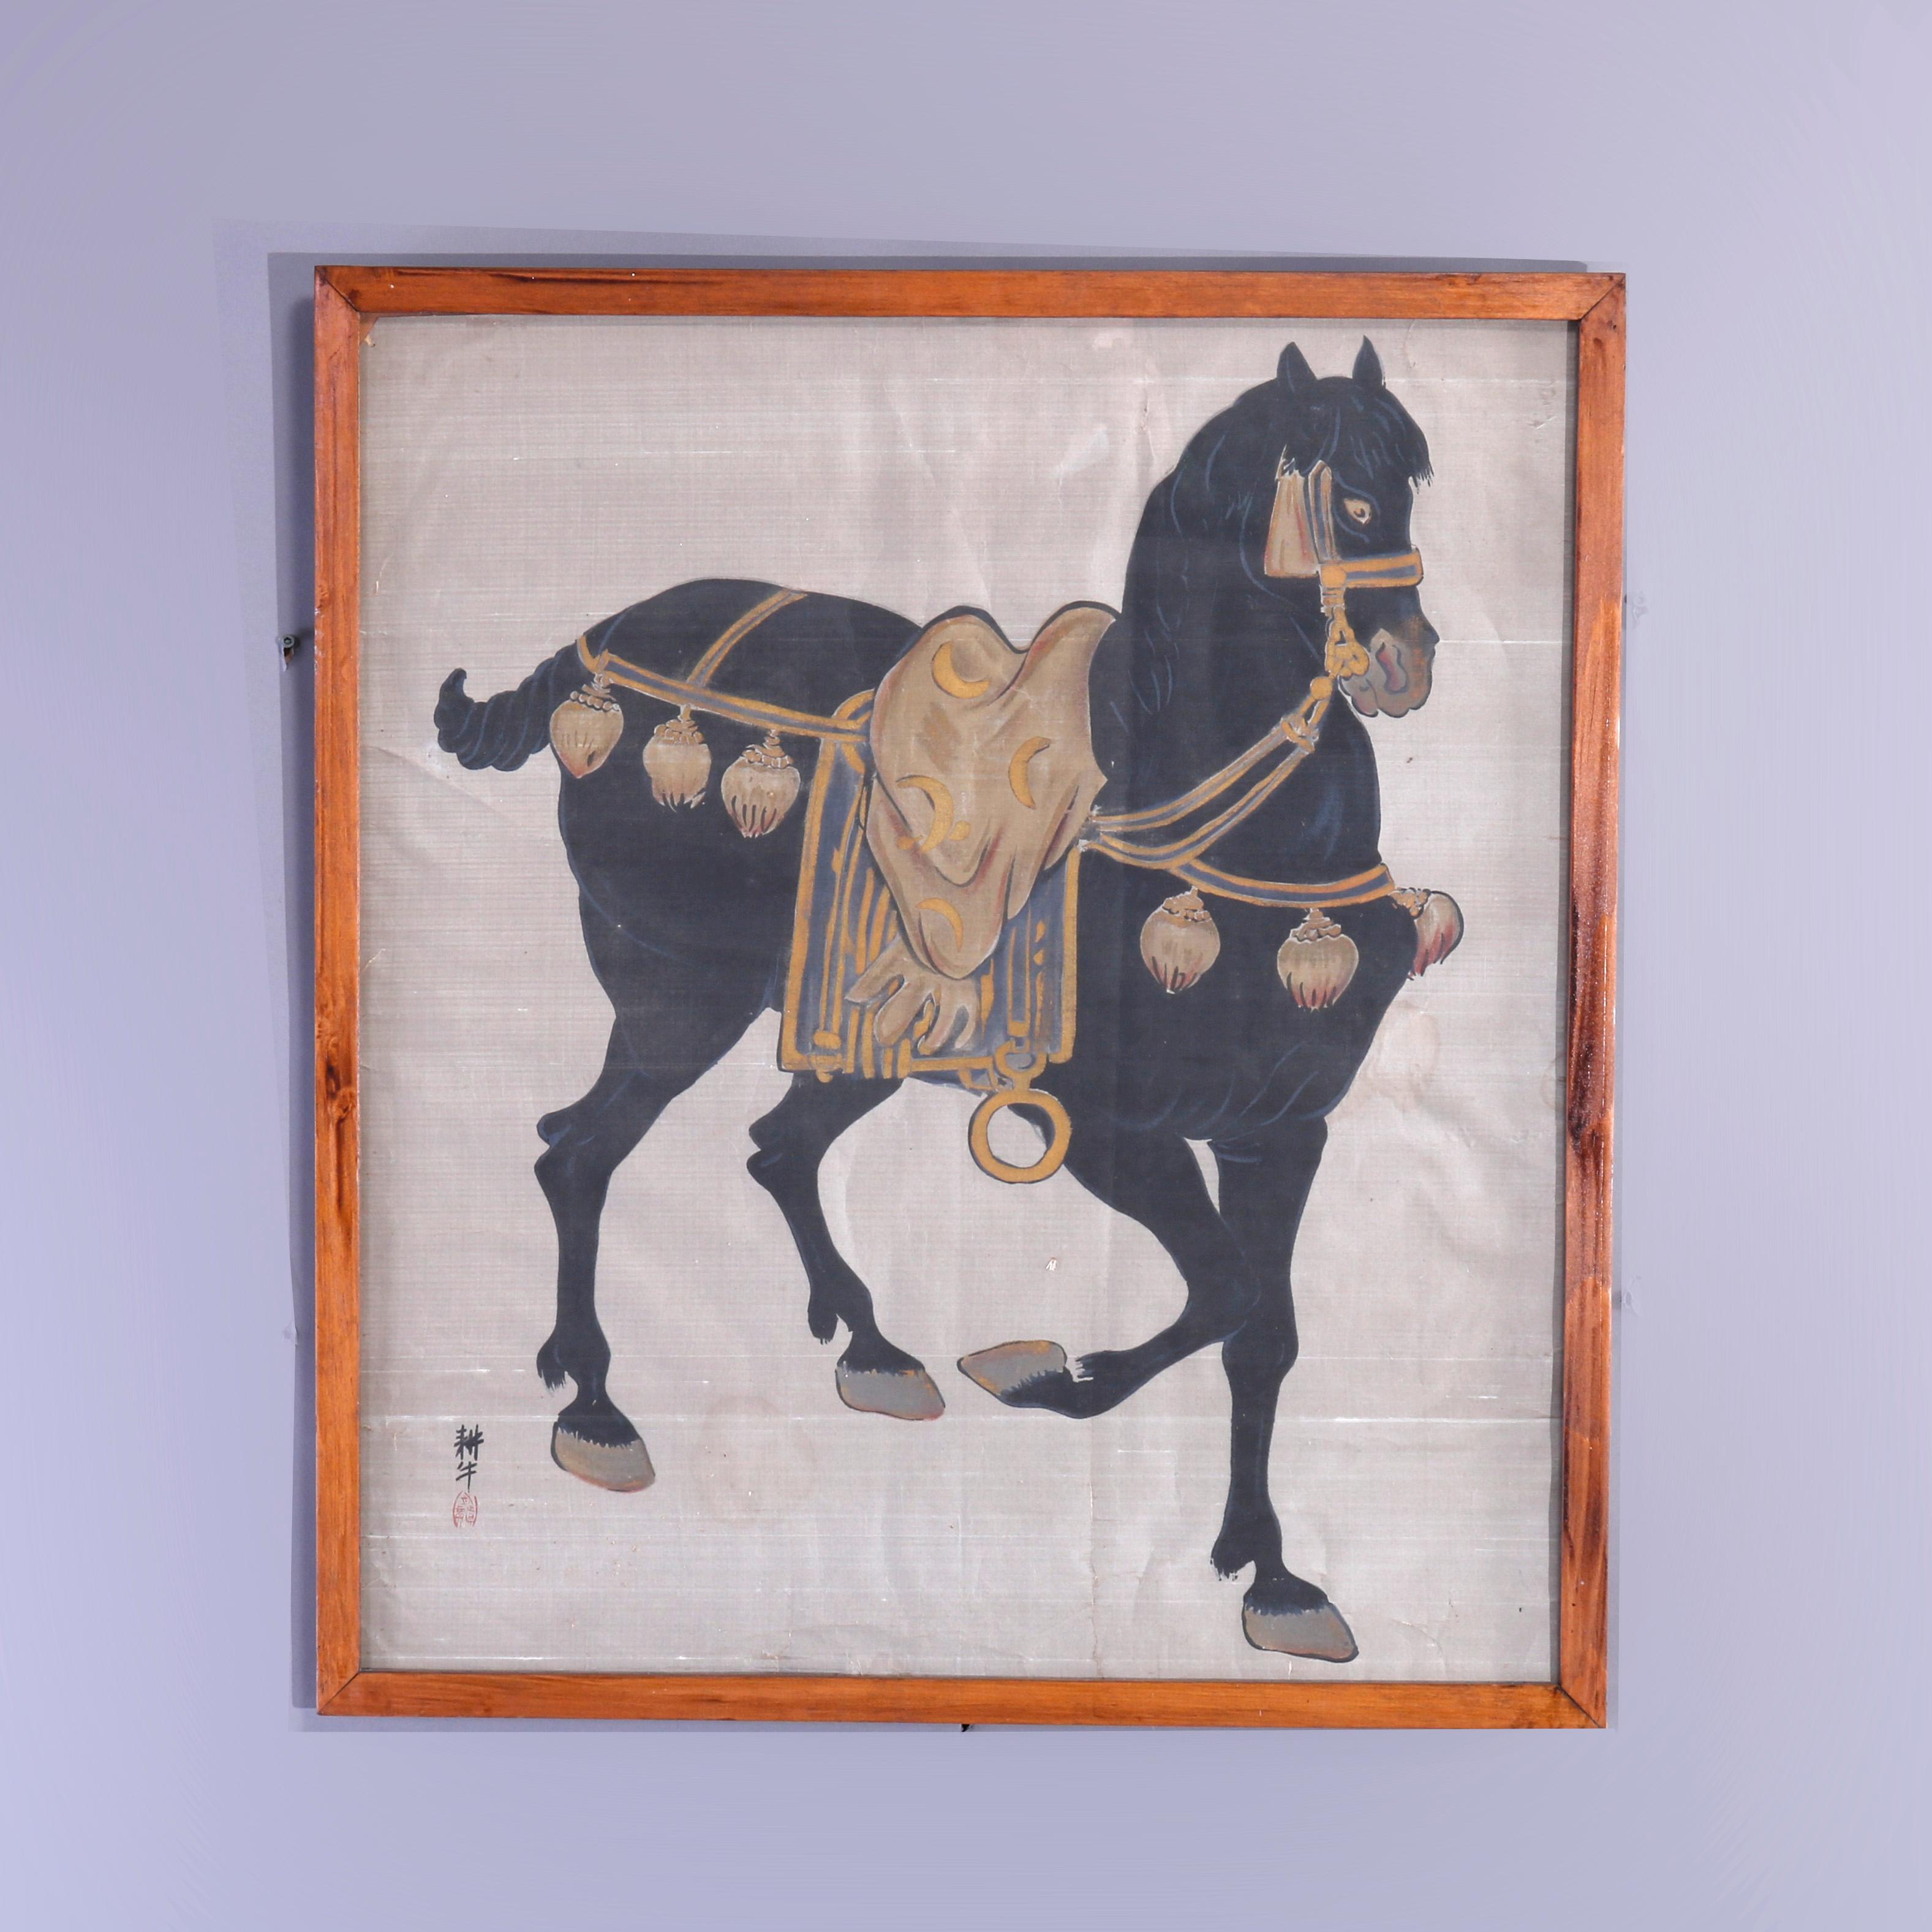 An antique Chinese Mandarin painting offers watercolor on silk portrait of a horse, signed lower left, framed, 19th century

Measures - 34''h x 30.25''w x 1.5''d; sight: 27.5'' x 31.5''.